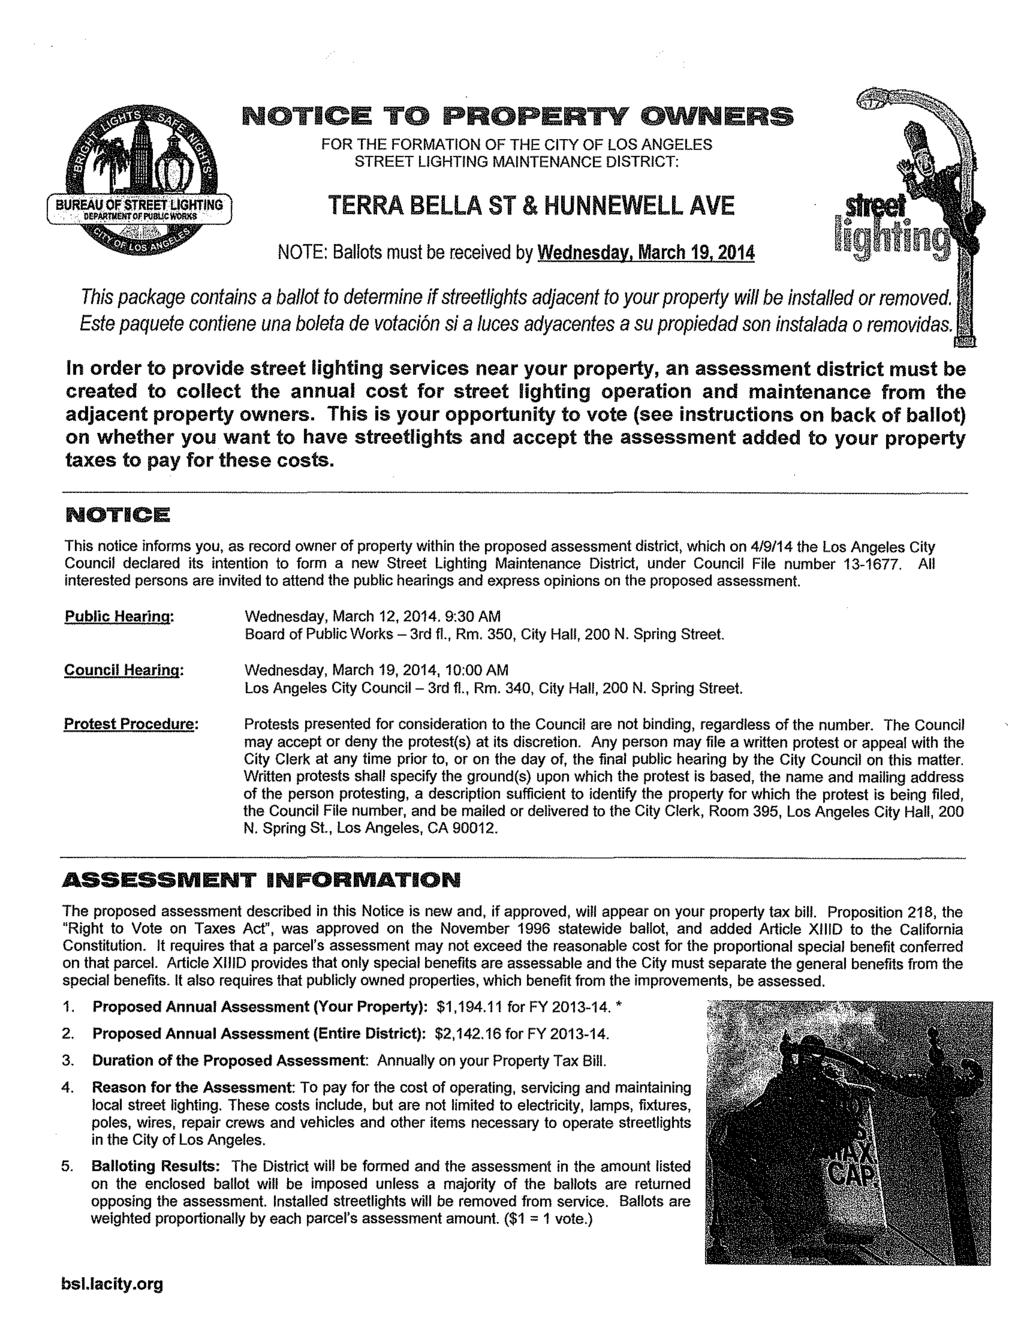 NOTICE TO PROPERTY OWNERS FOR THE FORMATION OF THE CITY OF LOS ANGELES STREET LIGHTING MAINTENANCE DISTRICT: TERRA BELLA 5T & HUNNEWELL AVE NOTE: Ballots must be received by Wednesday, March 19,2014